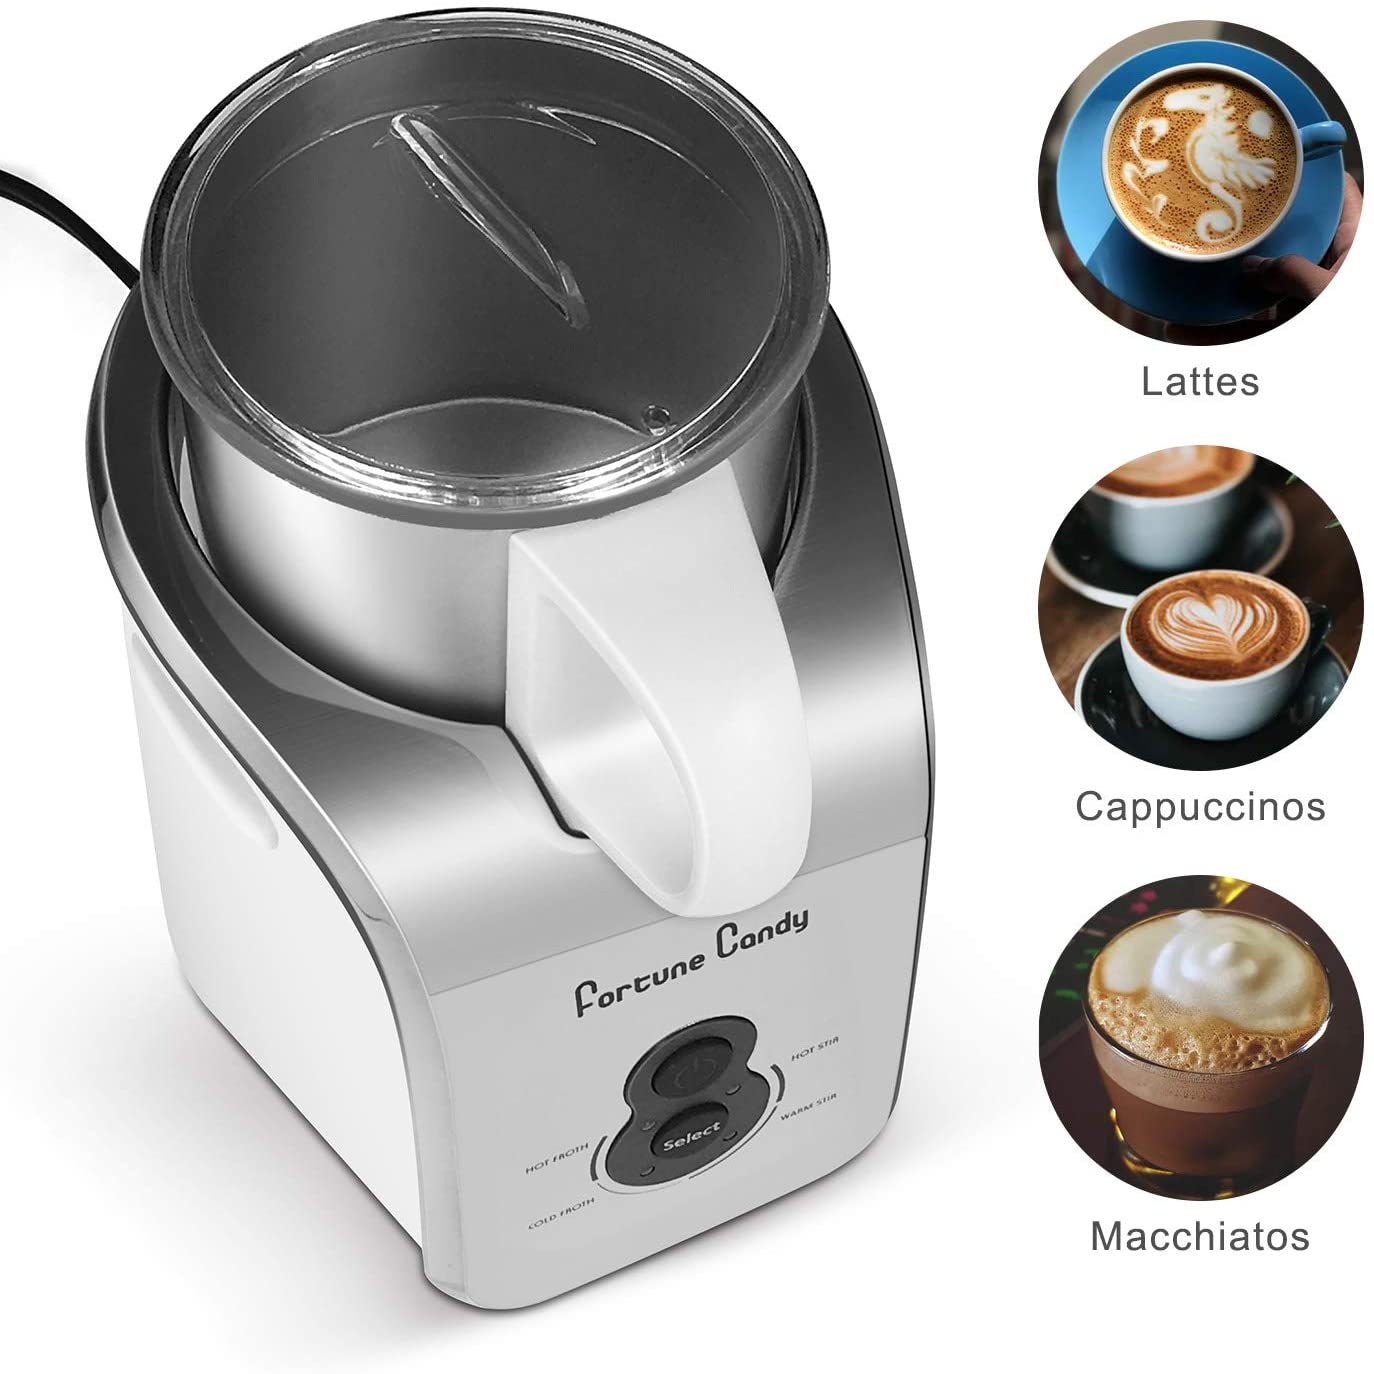 SPACEKEY Milk Frother, 4 IN 1 Automatic Milk Foam Maker for Hot & Cold –  Spacekey